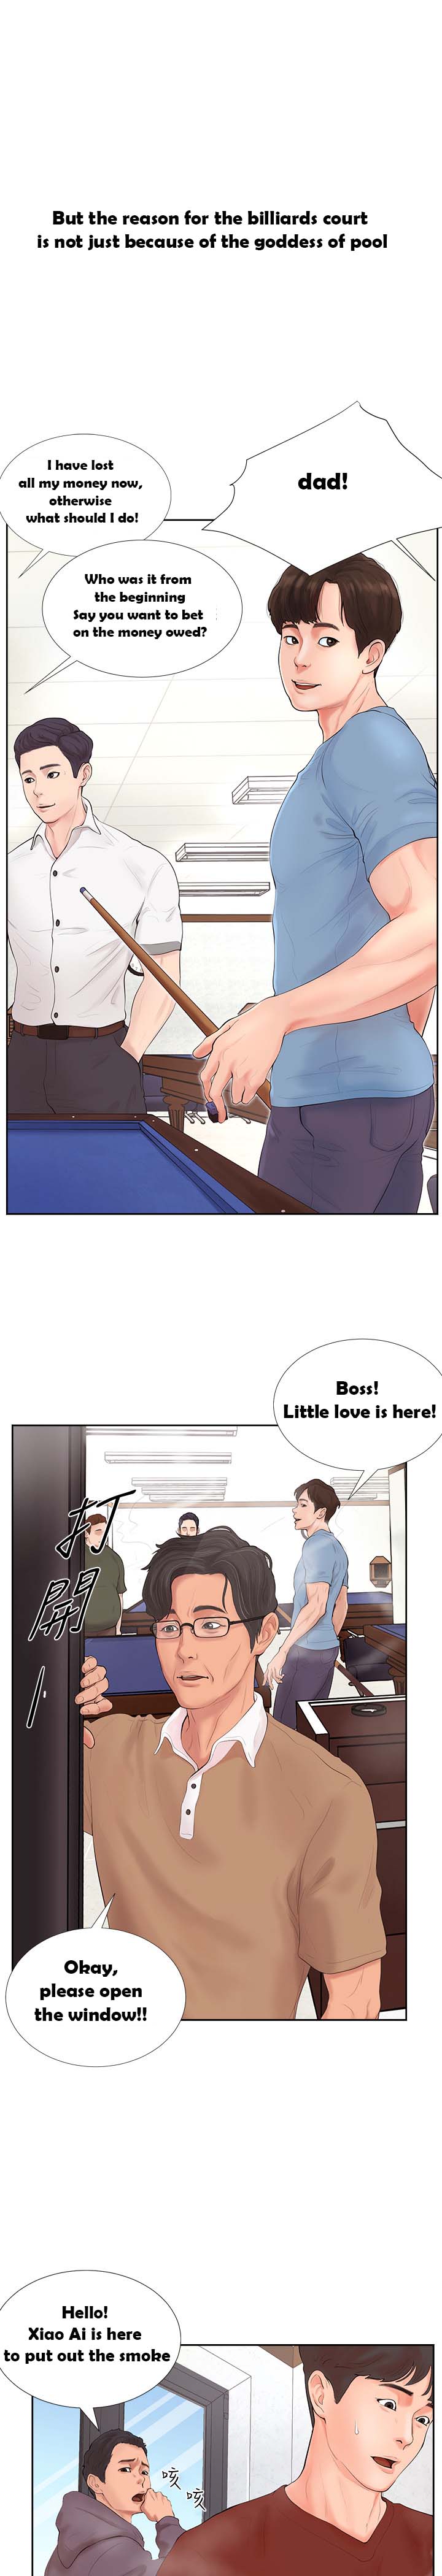 Billiard Room Love - Chapter 1 Page 7